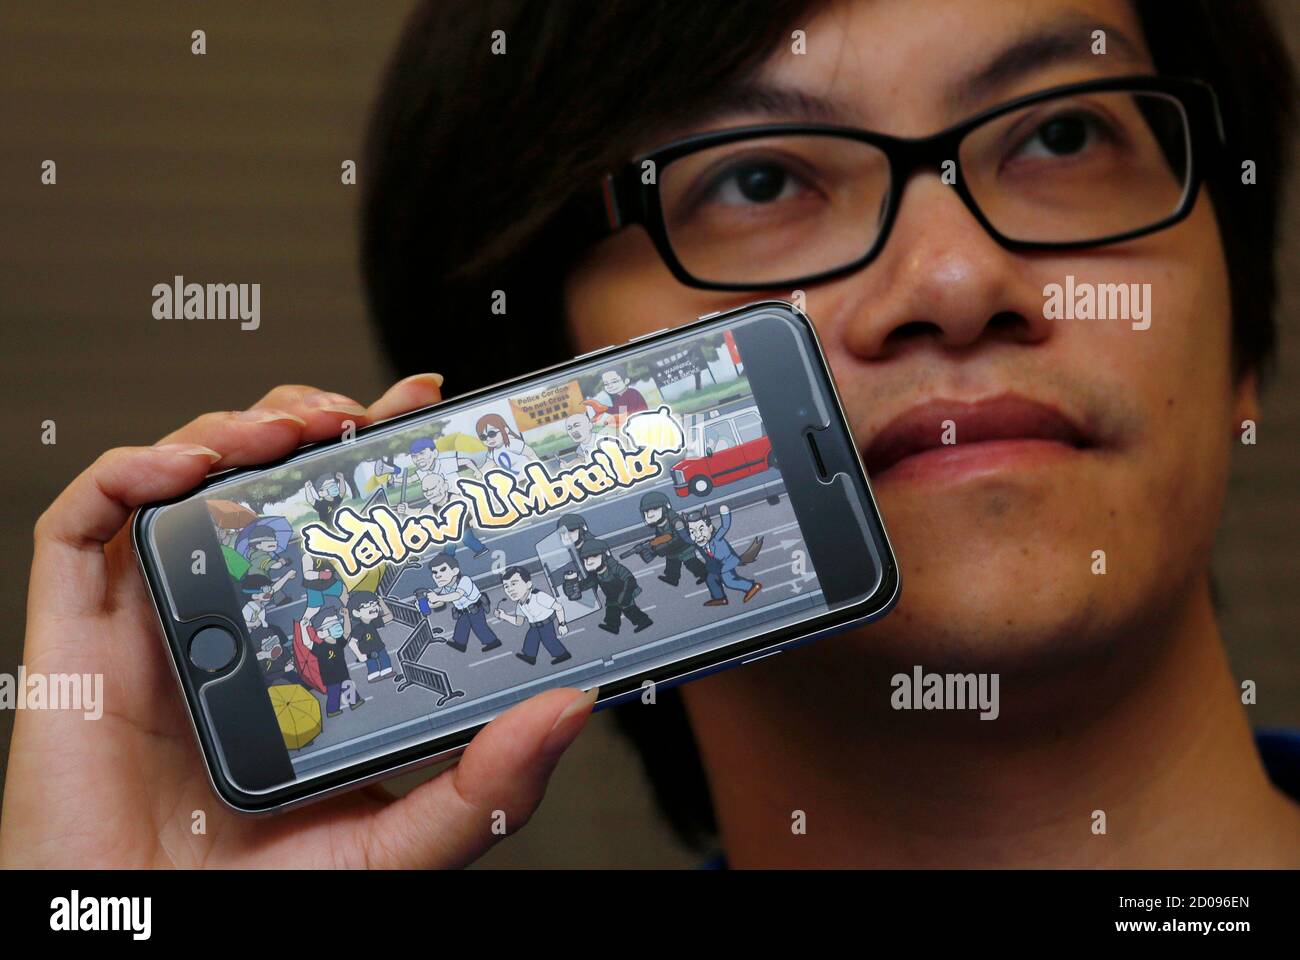 CEO of Hong Kong- based app-development company Awesapp Fung Kam Keung  poses with the opening scene of his 